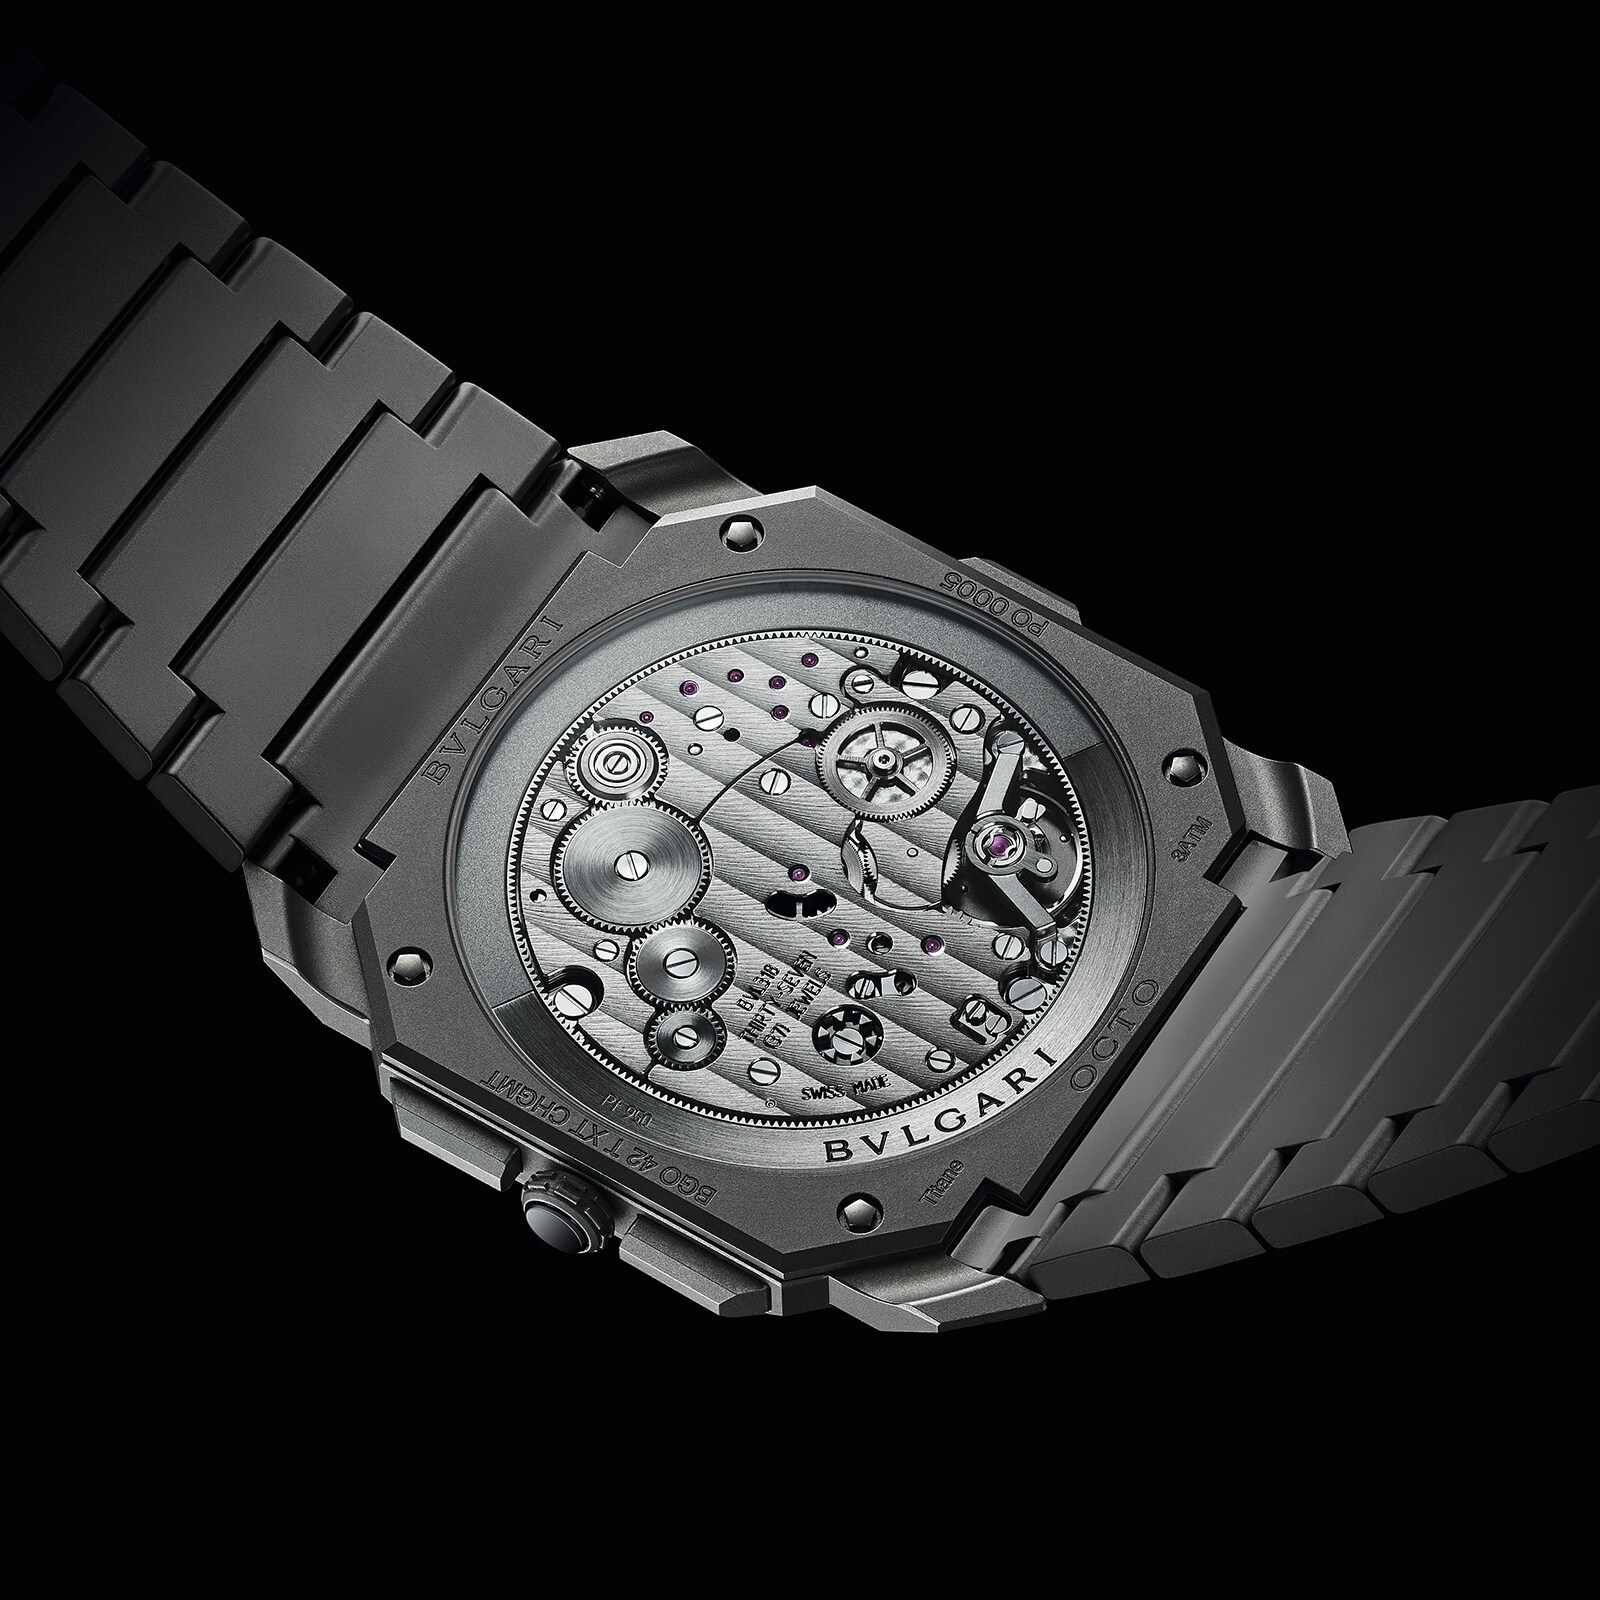 Titanium Octo Finissimo 42mm Grey Dial Automatic Chronograph Gents Watch